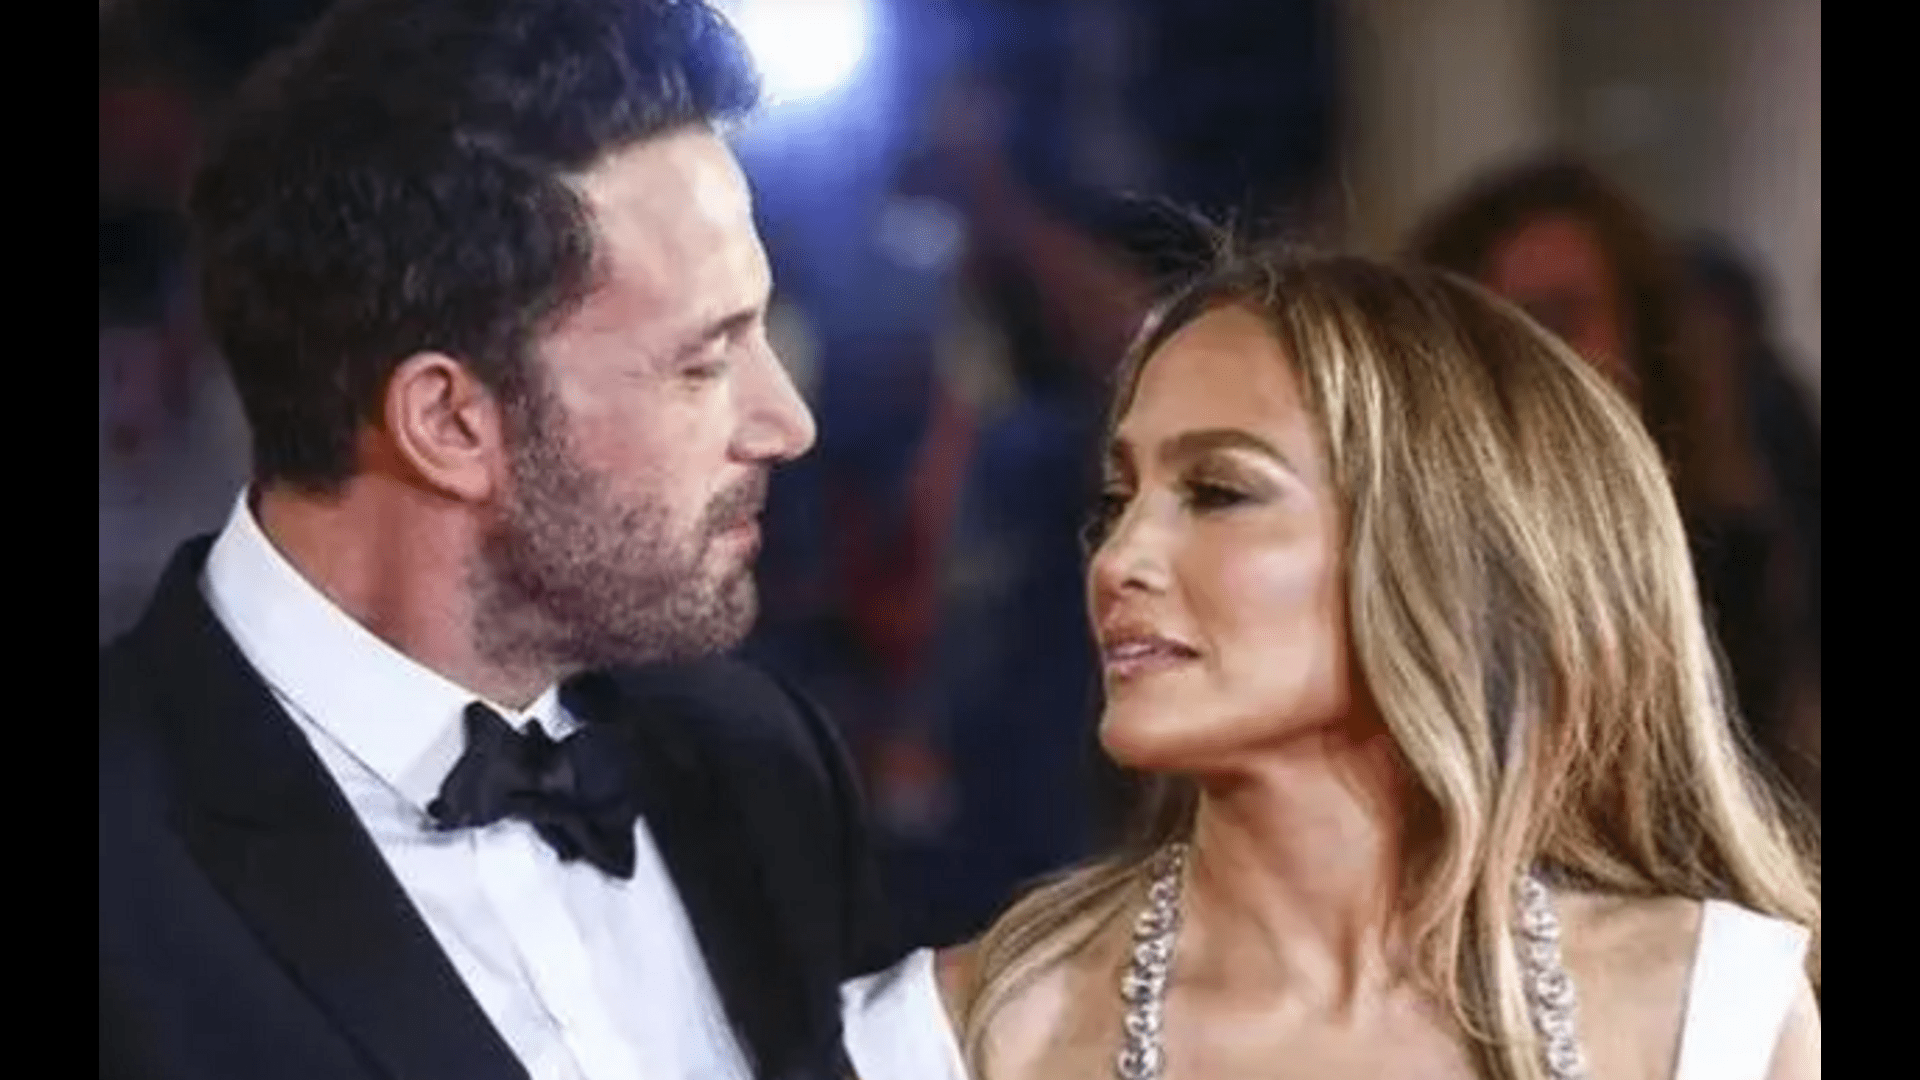 jennifer-lopez-reveals-how-ben-affleck-proposed-to-her-for-the-second-time-after-20-years-its-happening-again